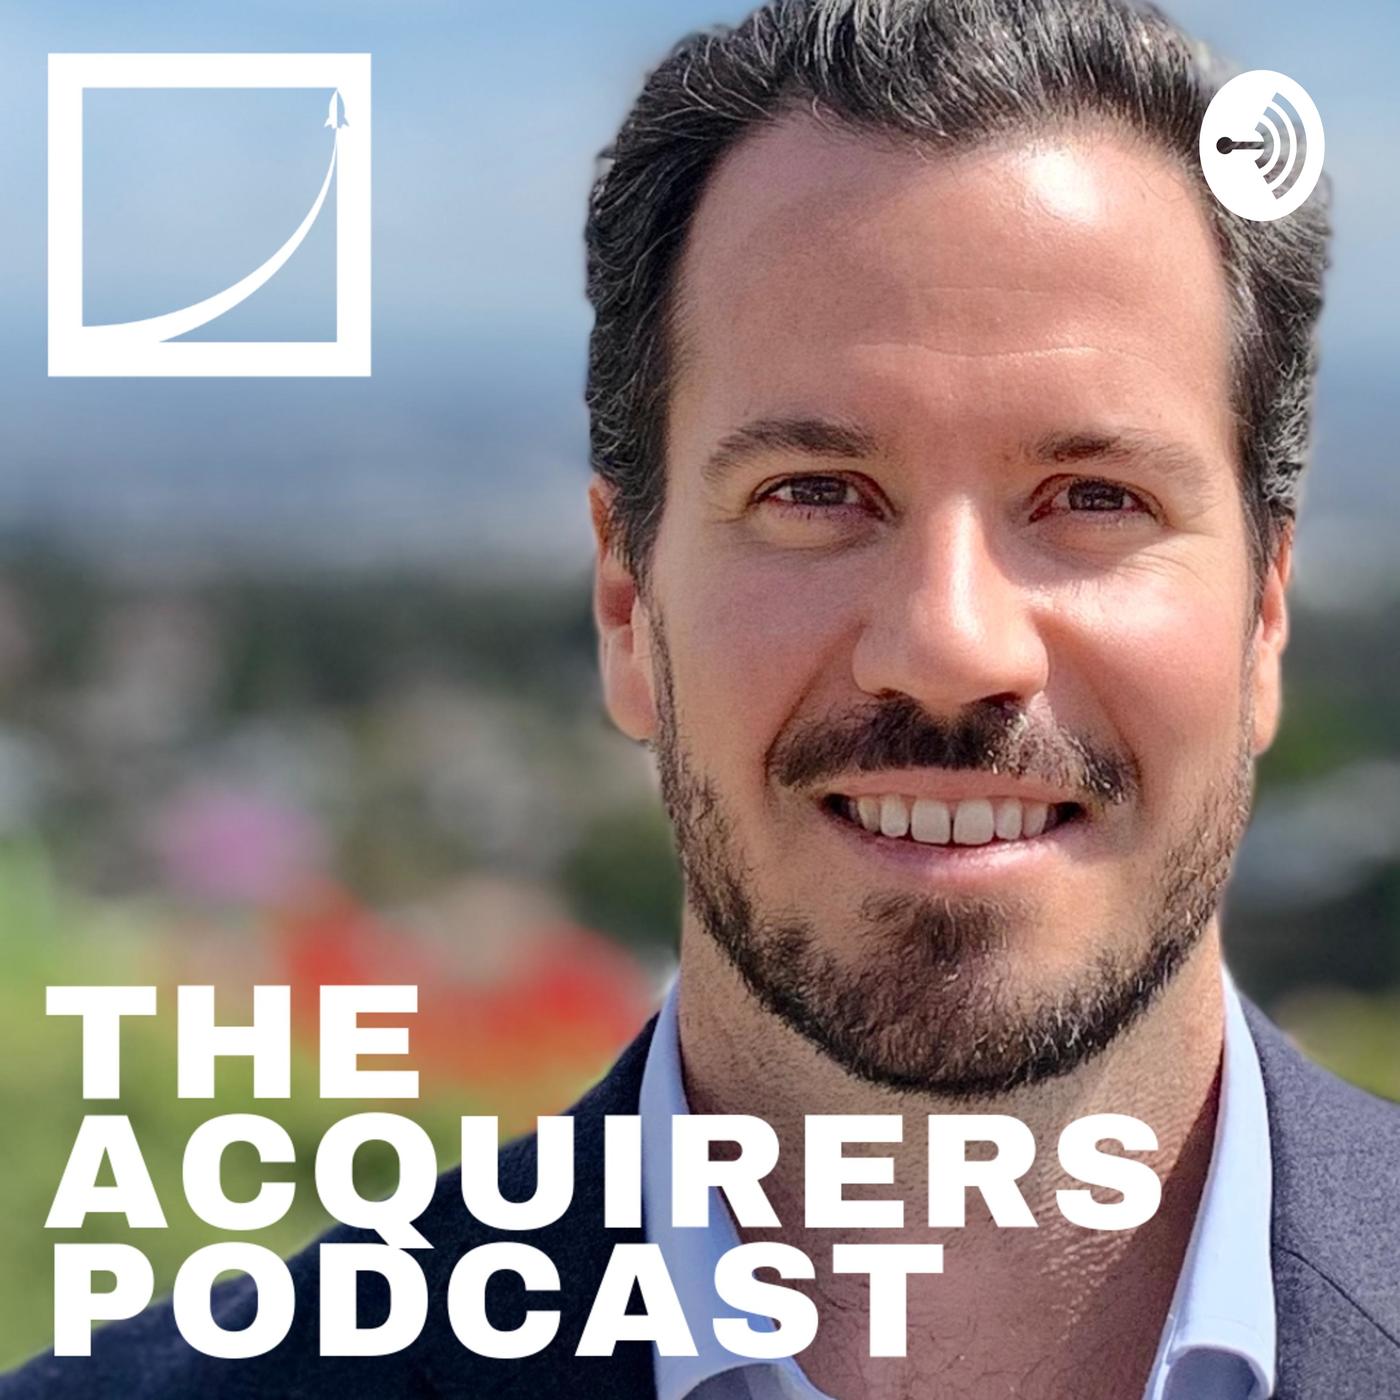 The Acquirer's Podcast